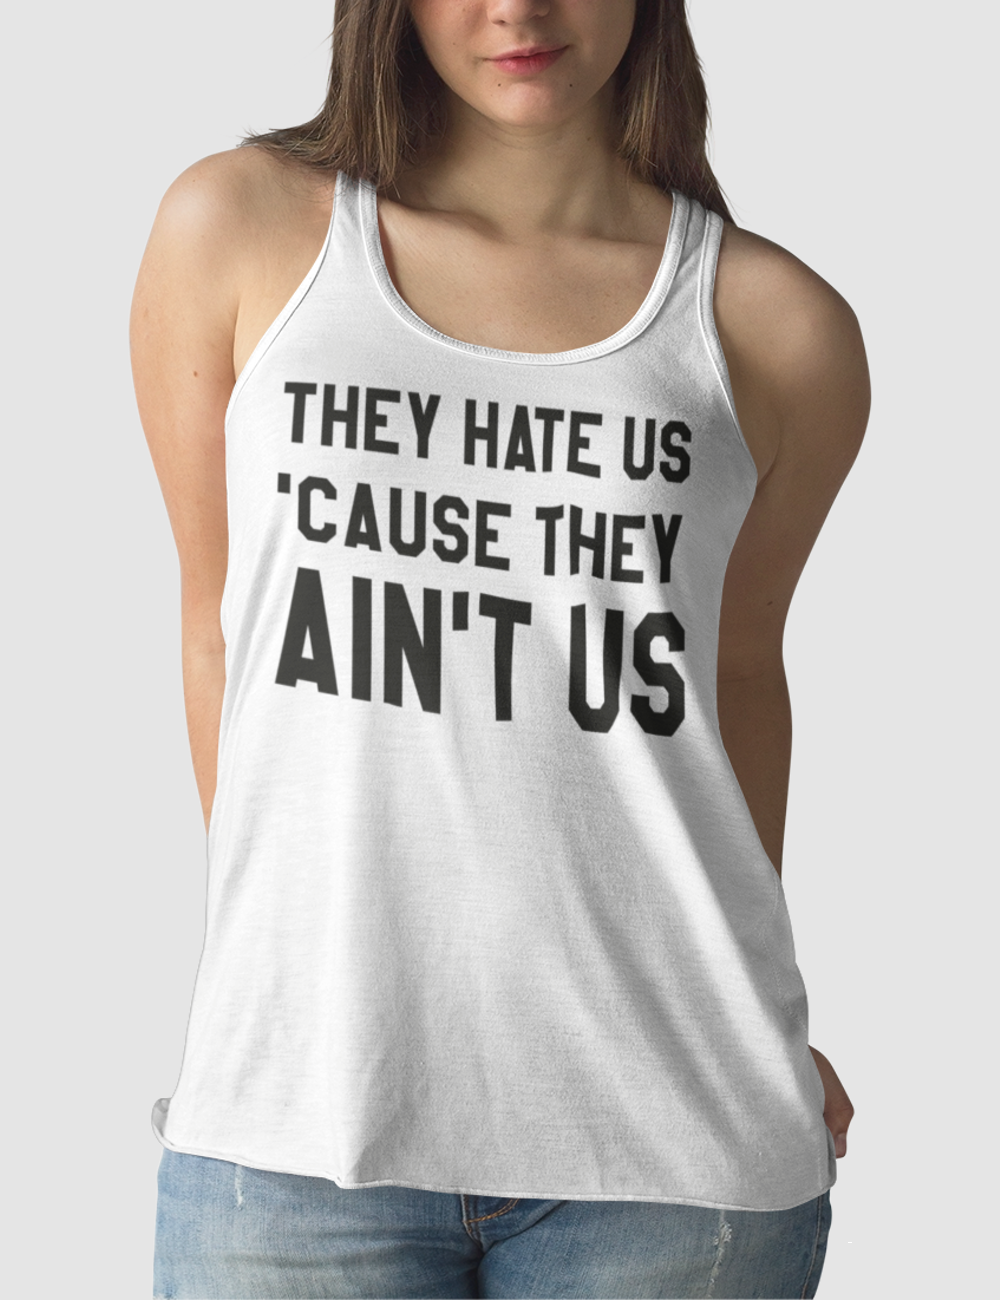 They Hate Us 'Cause They Ain't Us | Women's Cut Racerback Tank Top OniTakai